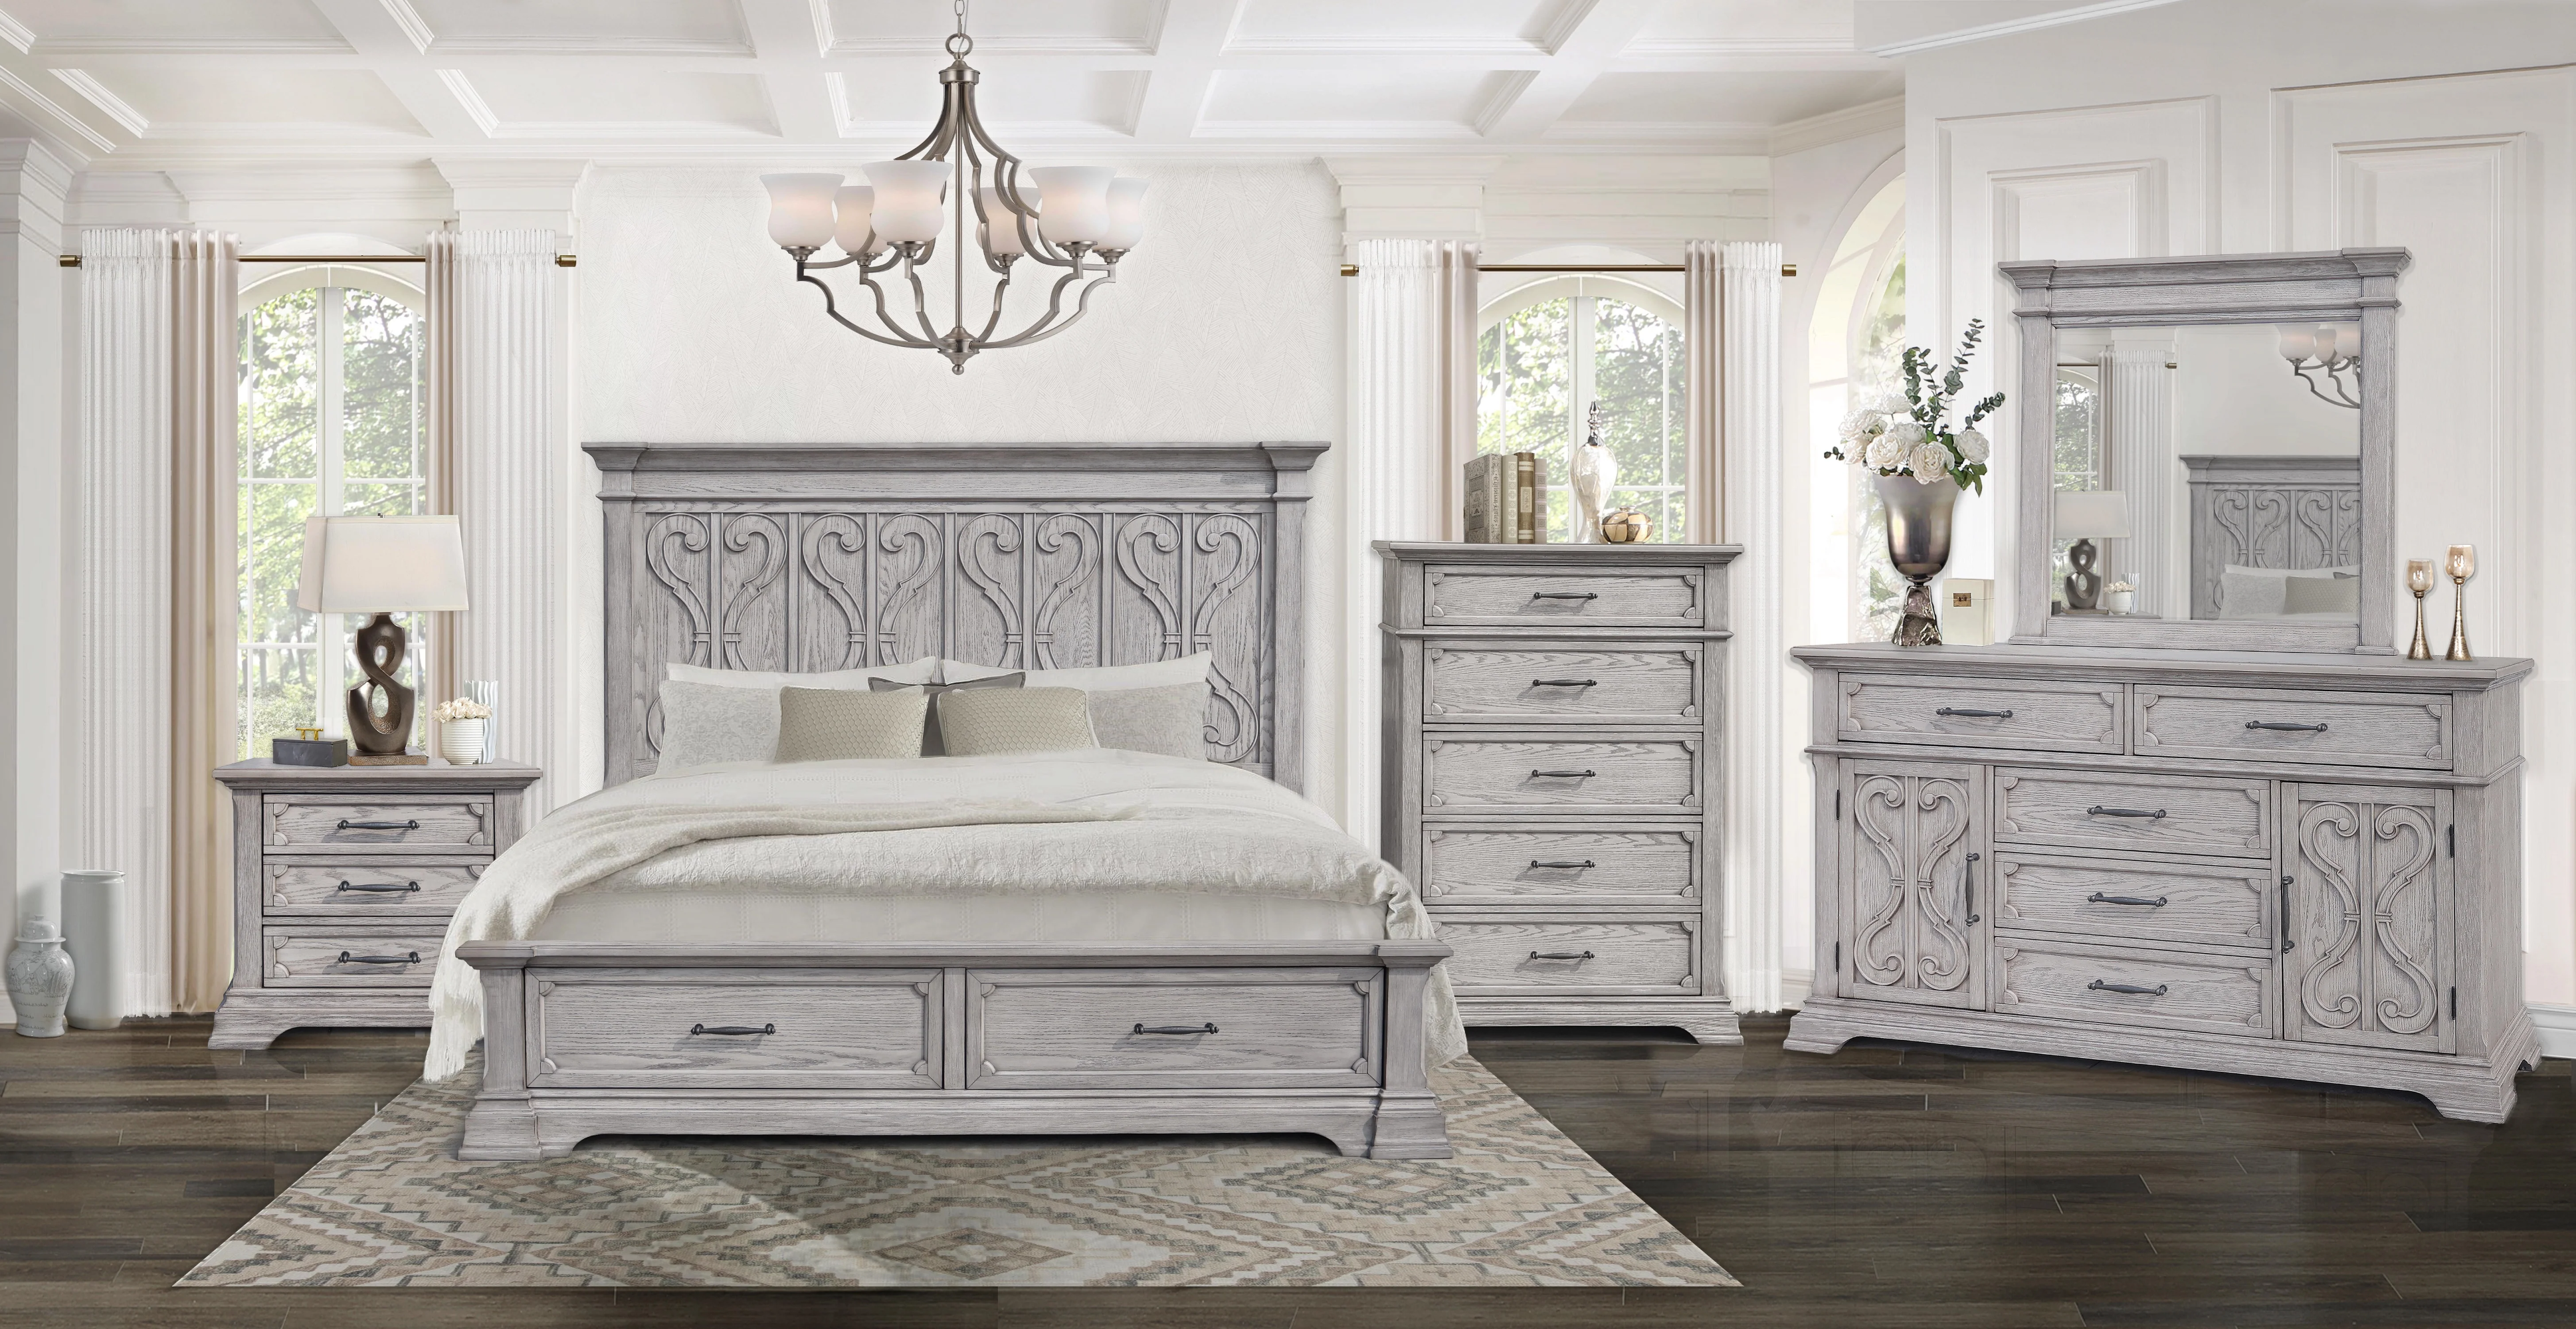 Night Stands: Enhance Your Bedroom with Stylish Night Stands